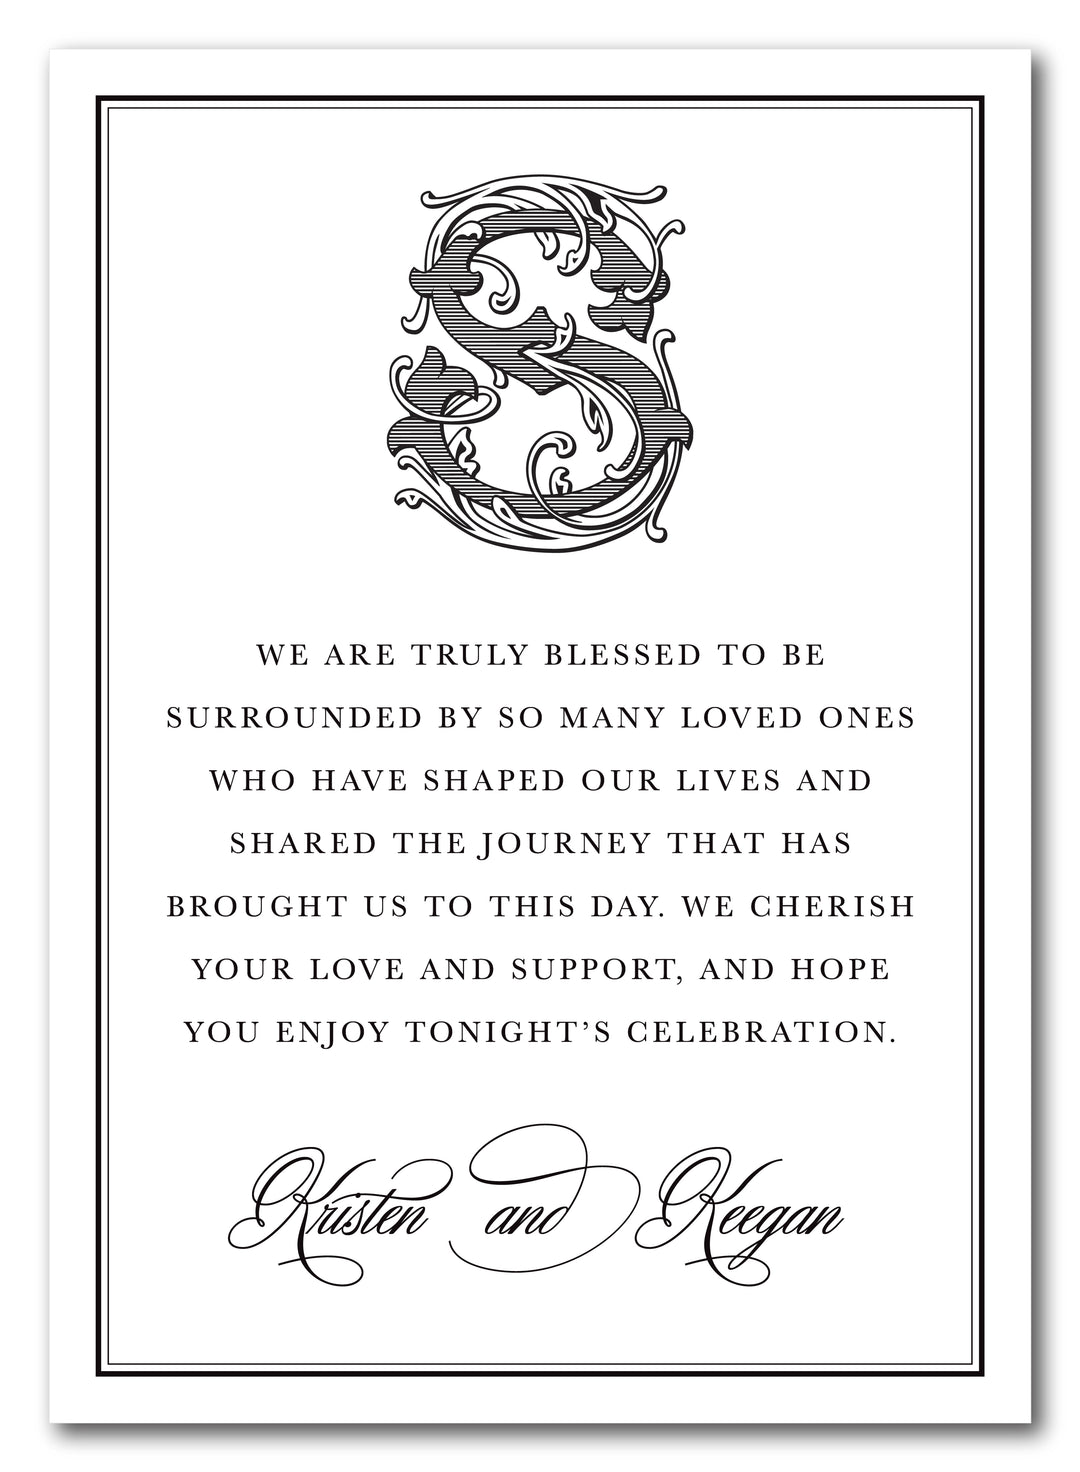 The Kristen Thank You Place Setting Card